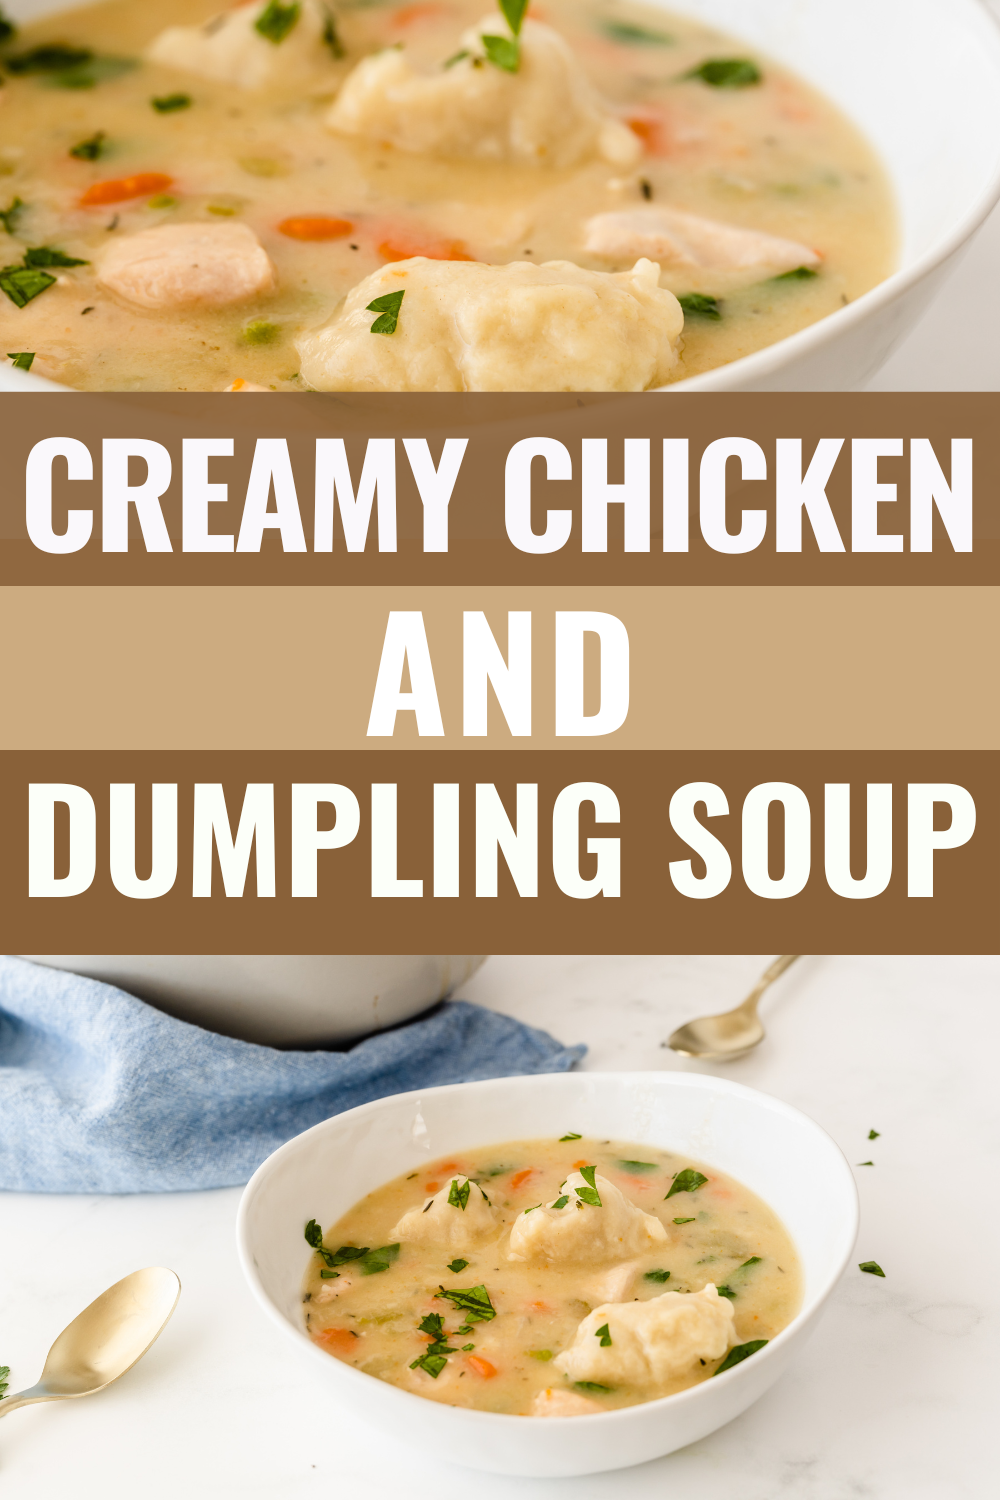 Creamy Chicken and Dumpling Soup | More Chicken Recipes